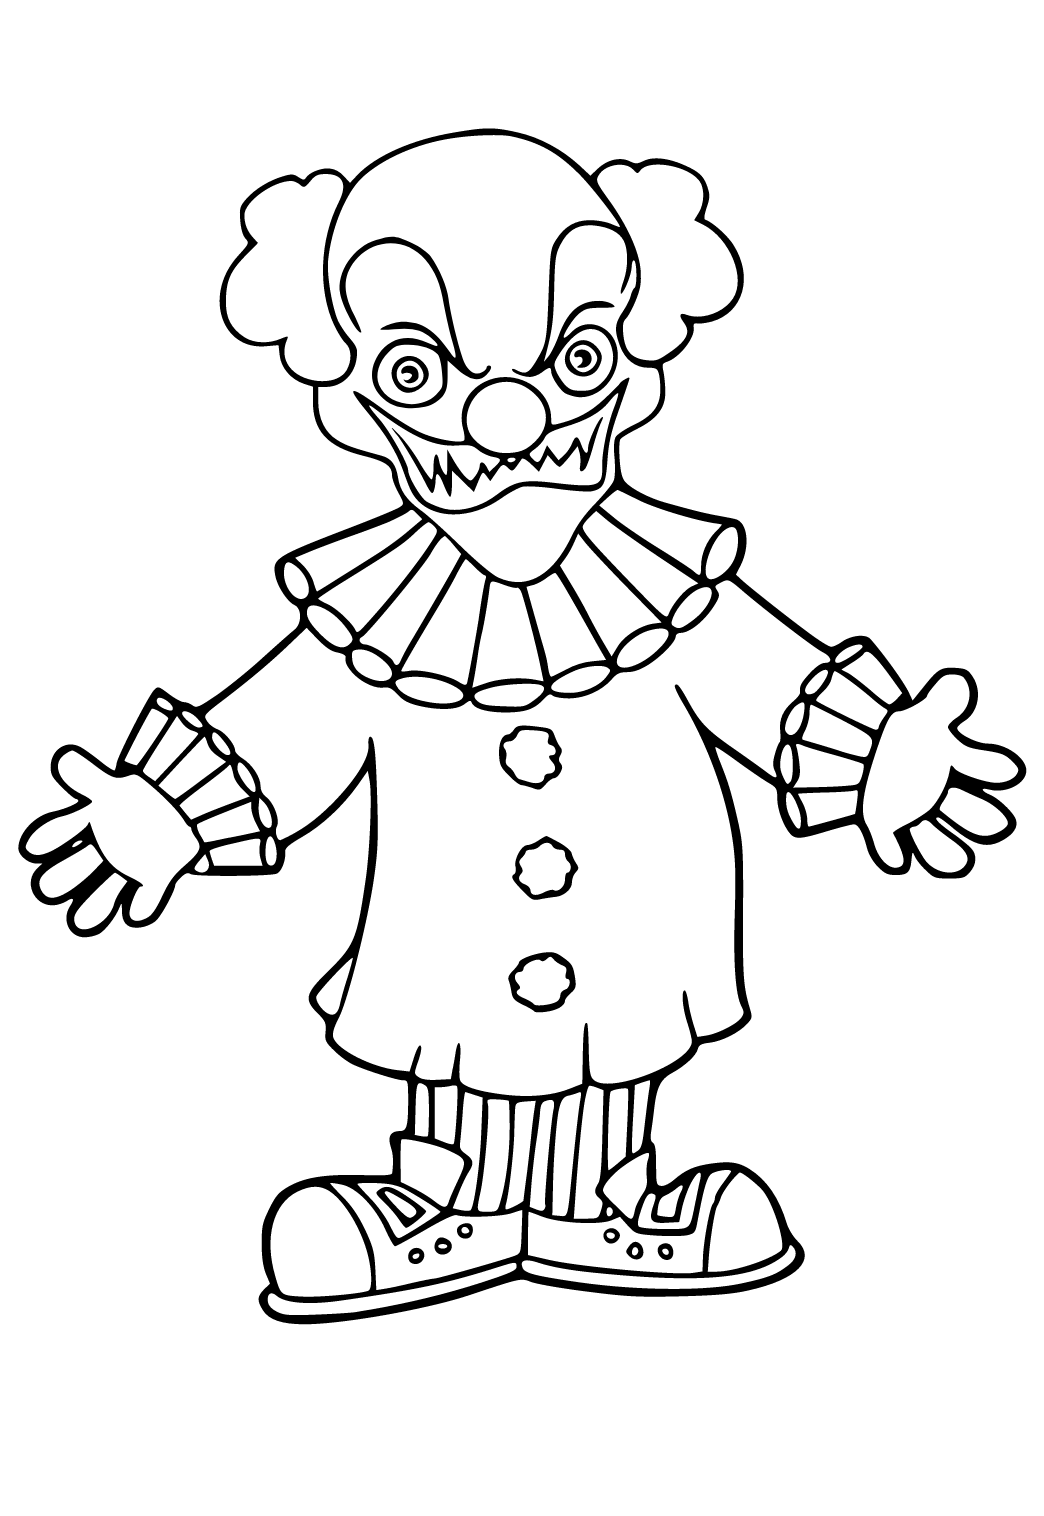 free-printable-clown-scary-coloring-page-for-adults-and-kids-lystok